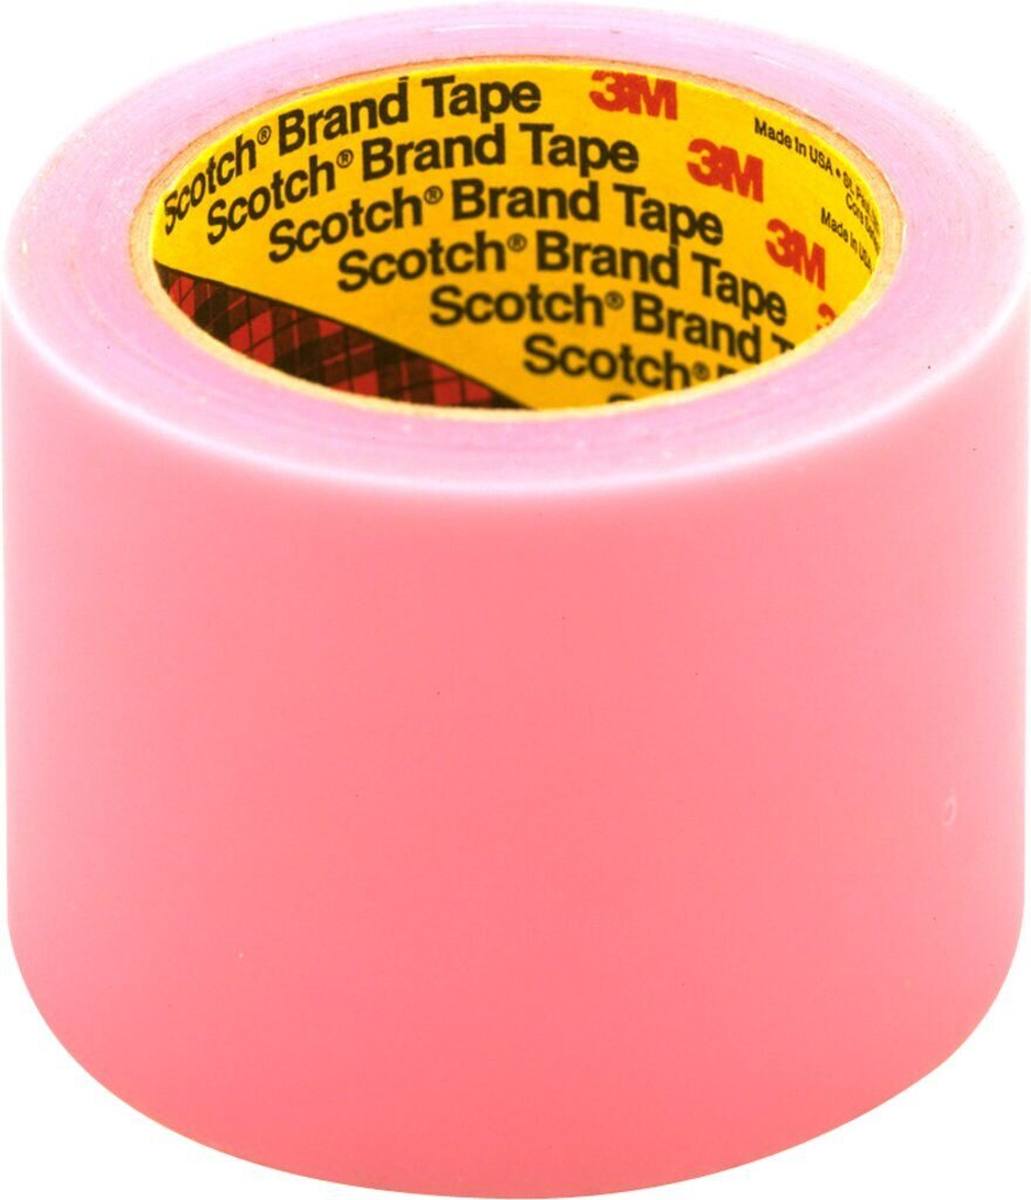 3M Scotch label protection tape 821, pink, 127 mm x 66 m, 0.063 mm